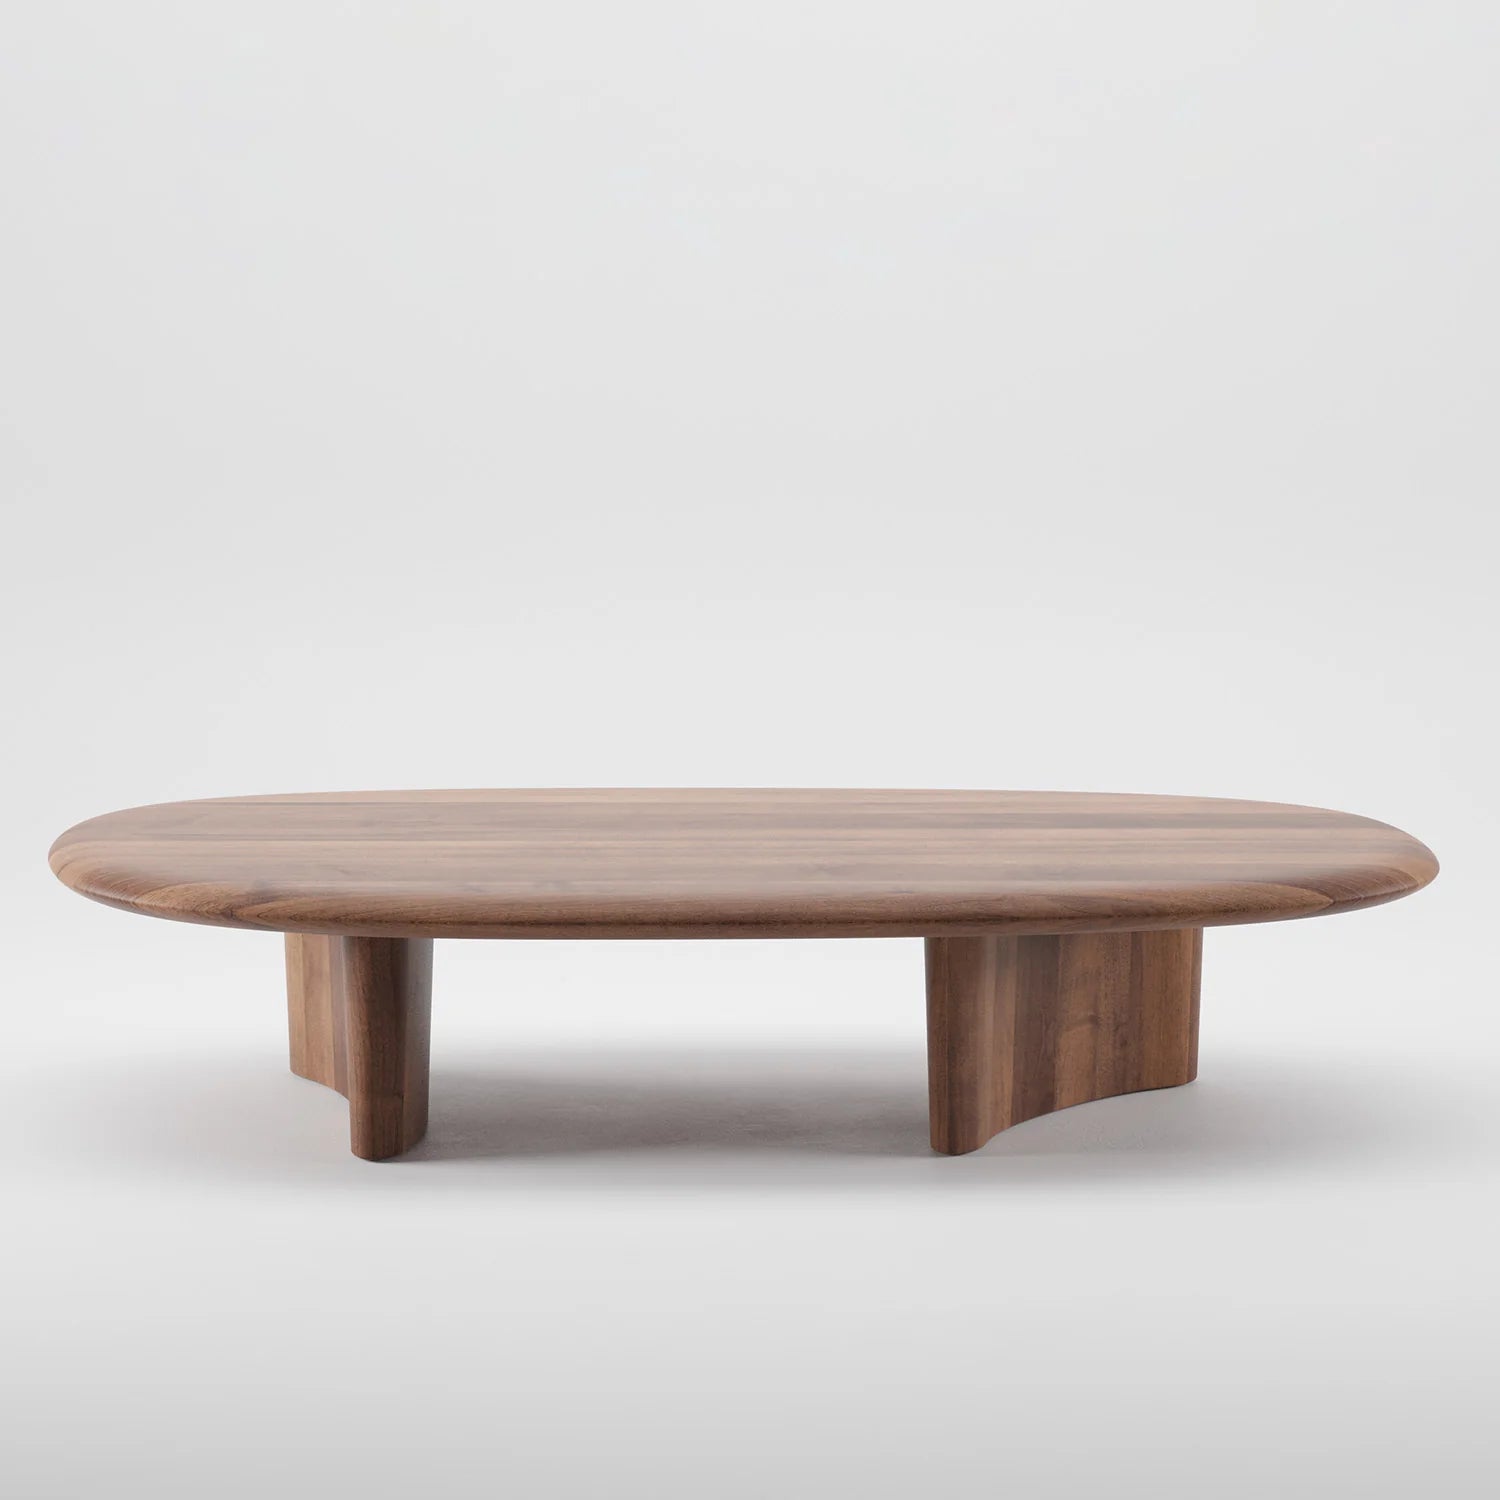 Artisan Monument oval coffee table